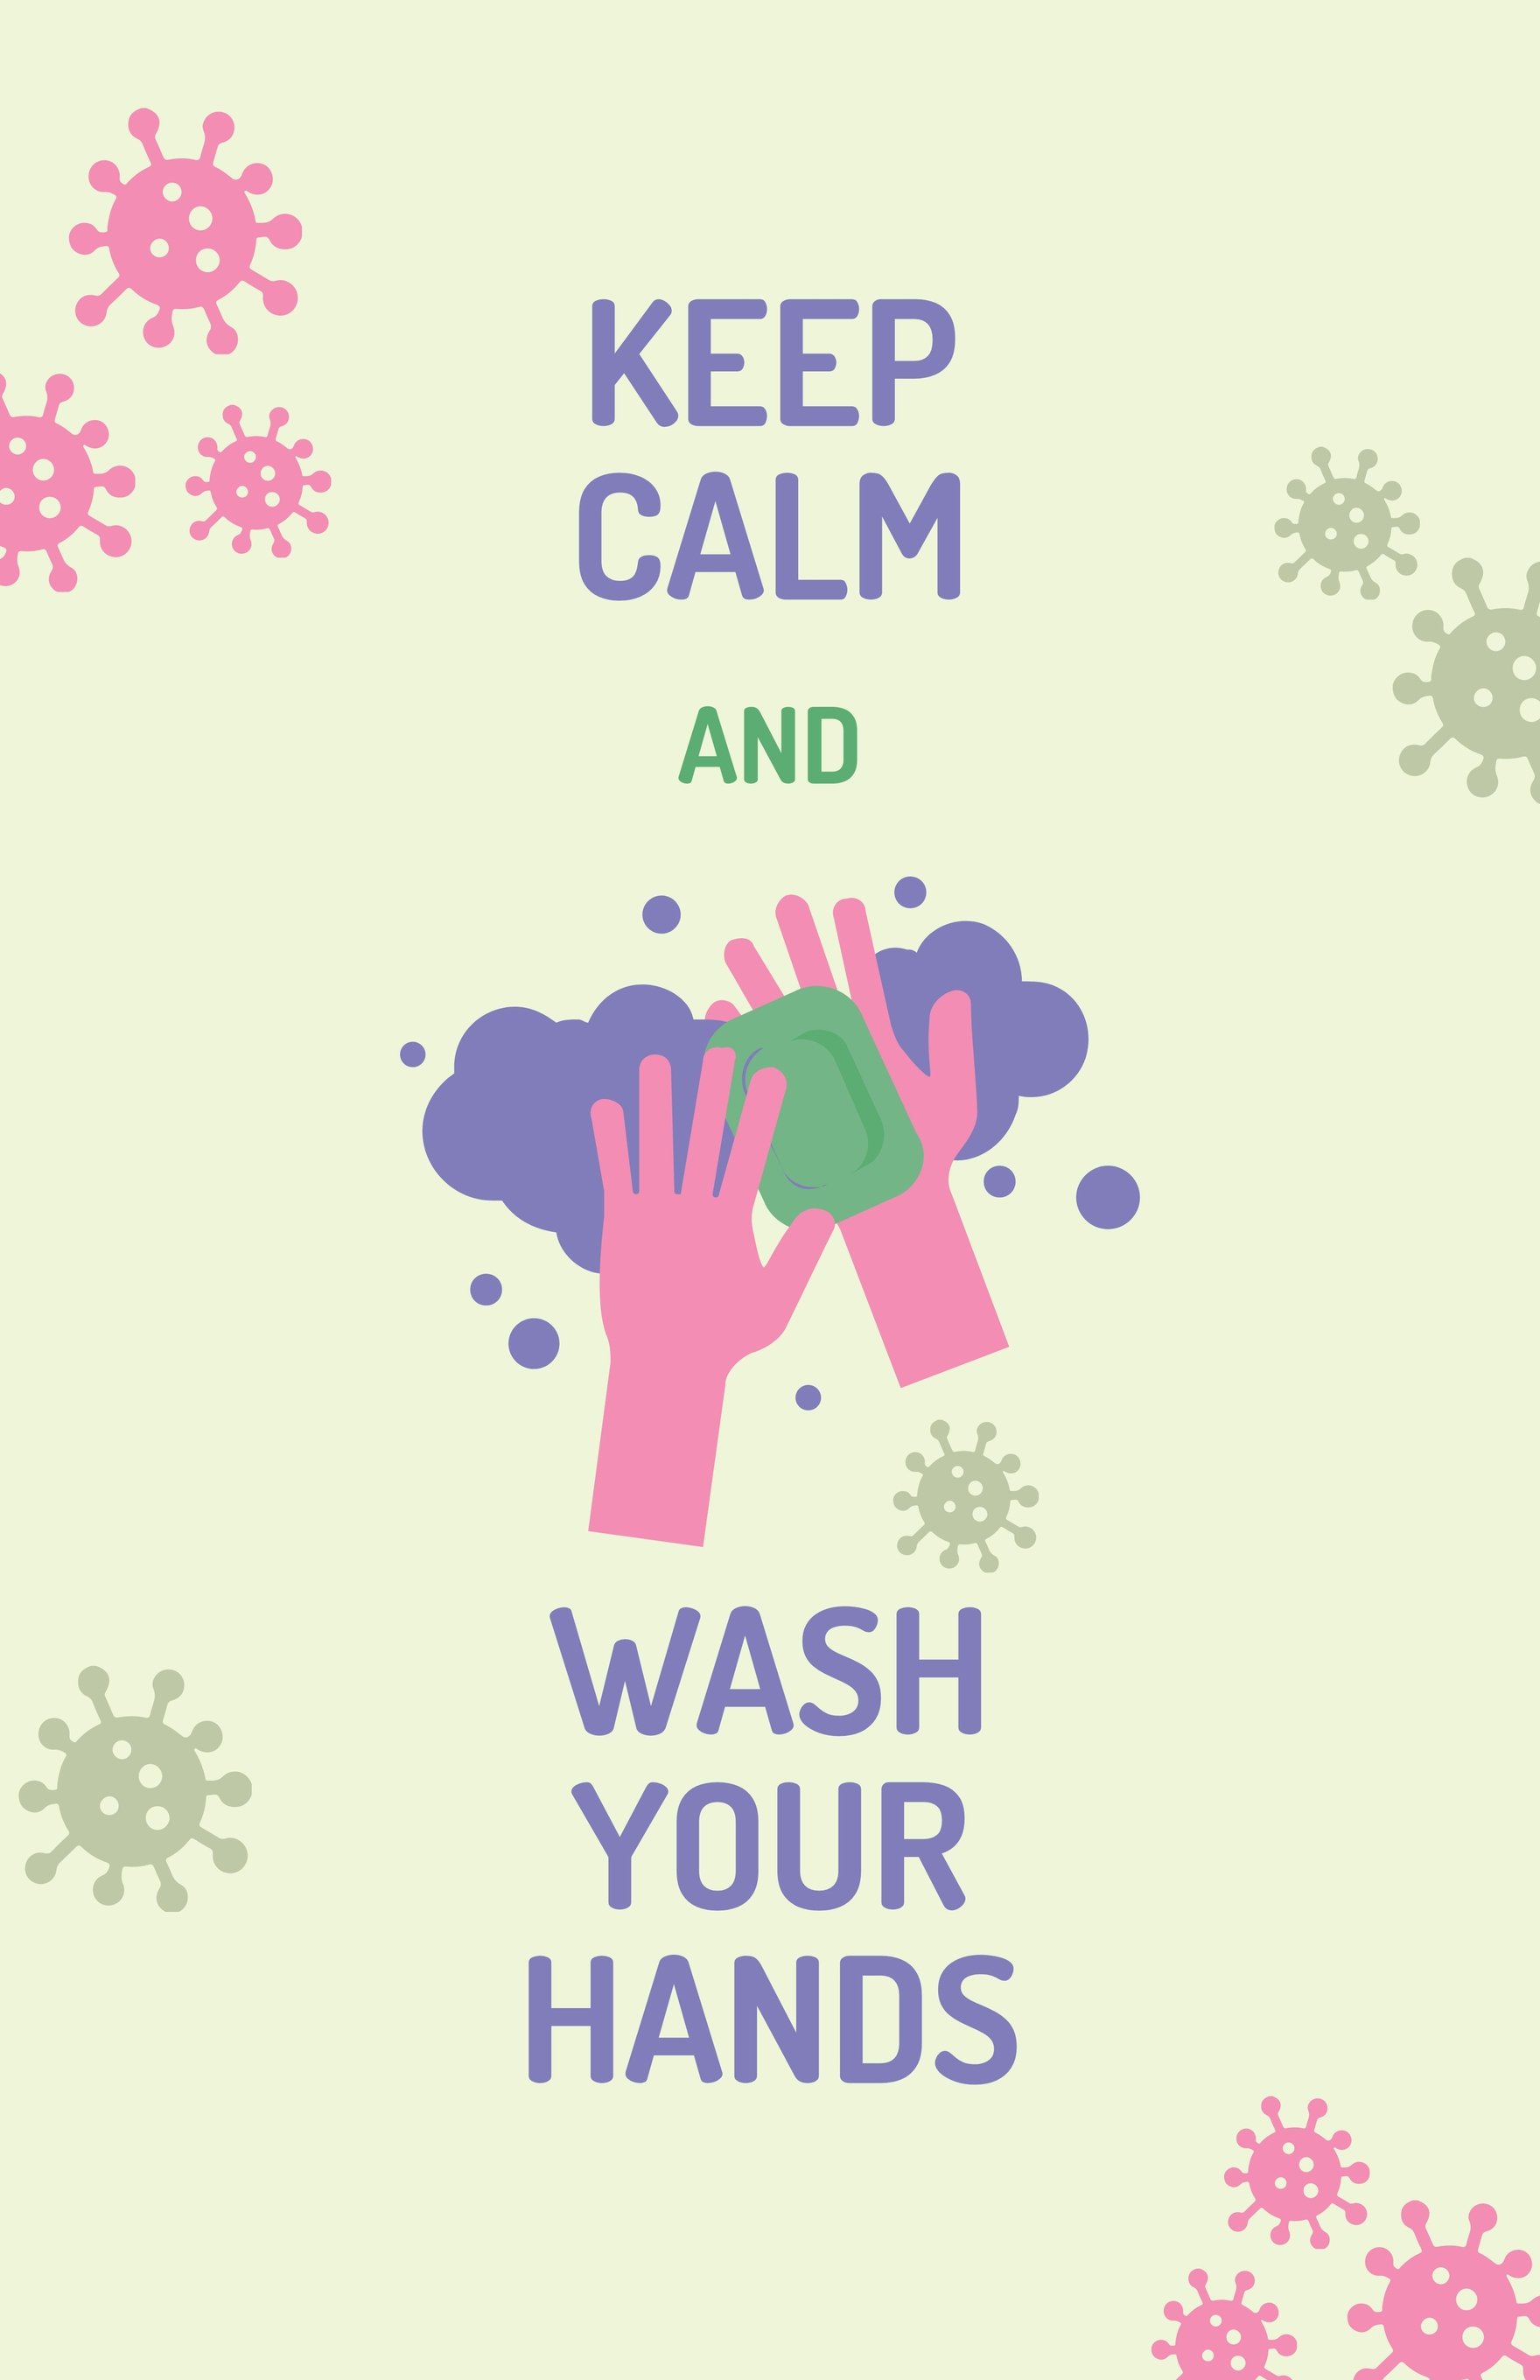 Free Keep Calm And Wash Your Hands Poster in Word, Google Docs, Illustrator, PSD, Apple Pages, Publisher, EPS, SVG, JPG, PNG